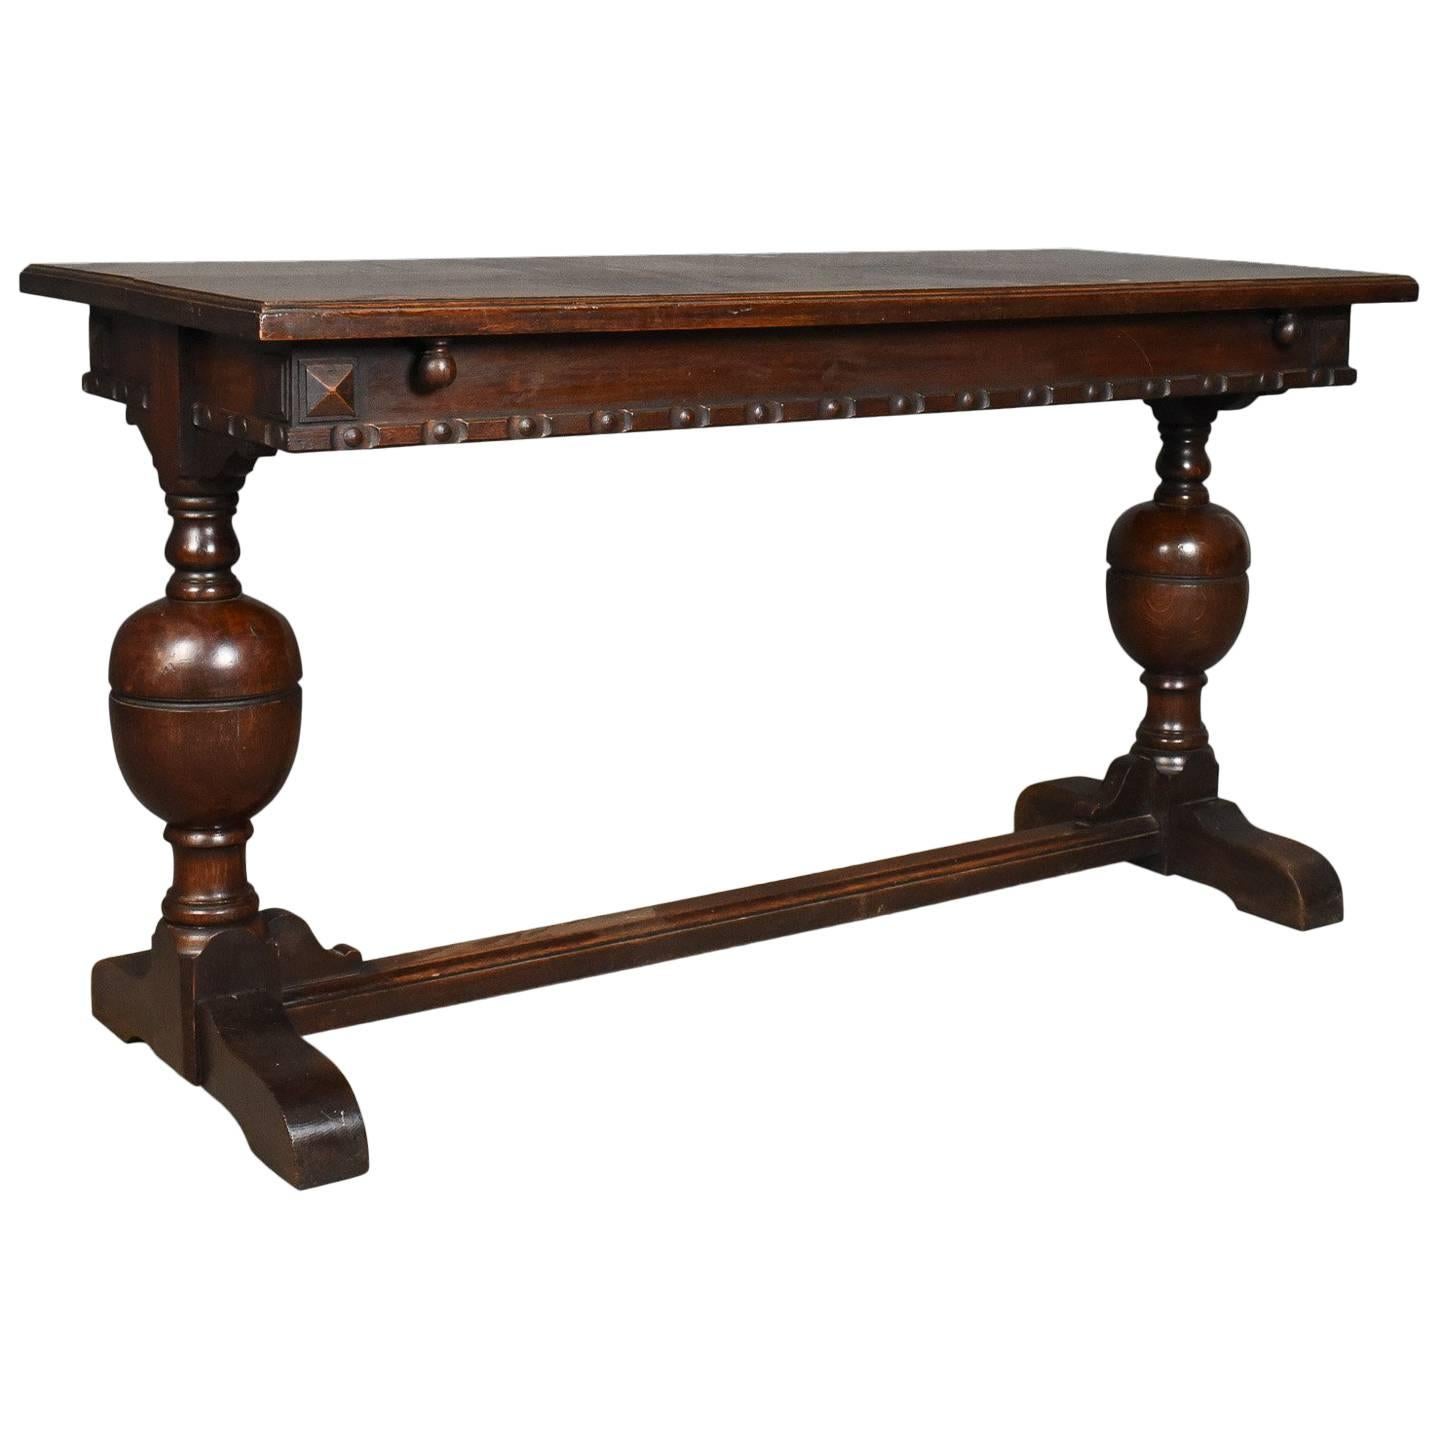 Extending Antique Dining Table, 17th Century Refectory Taste, English circa 1900